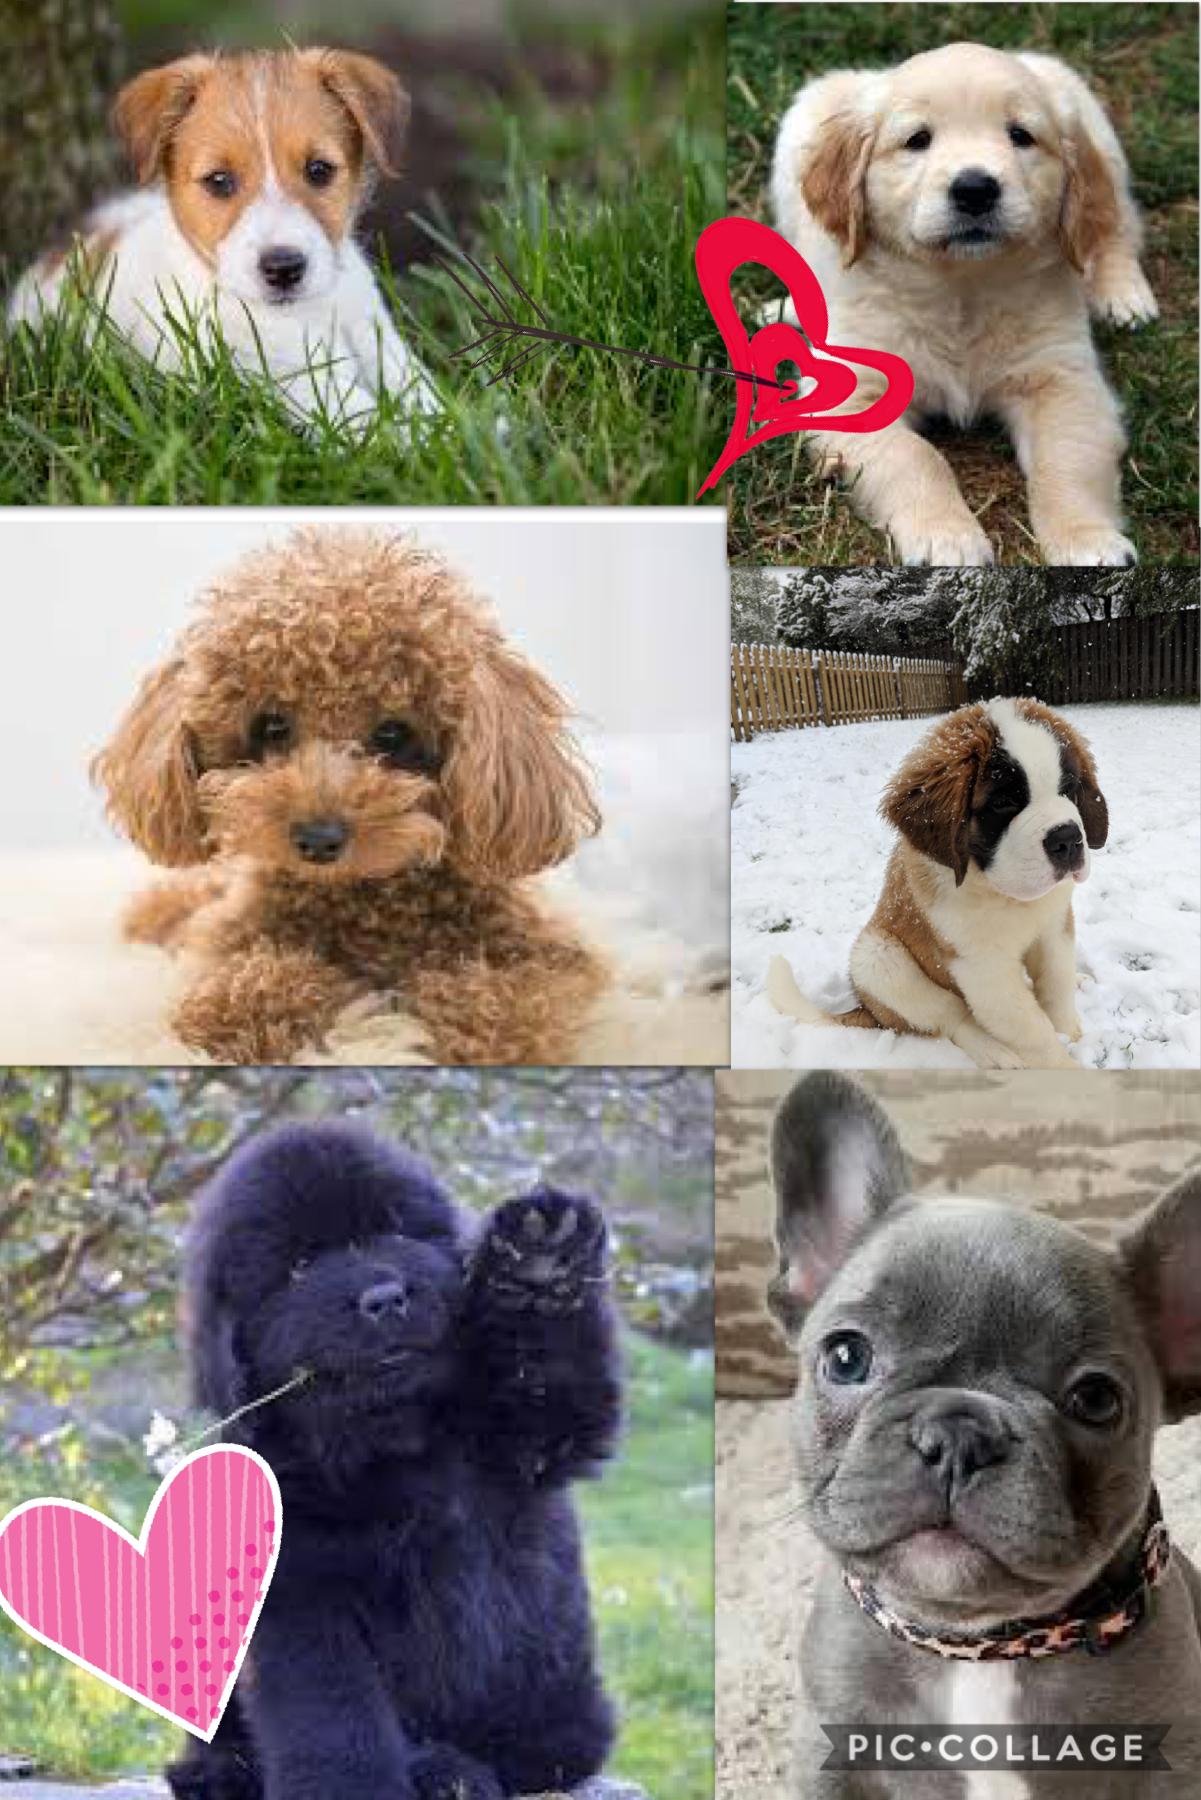 Which is the cutest puppy